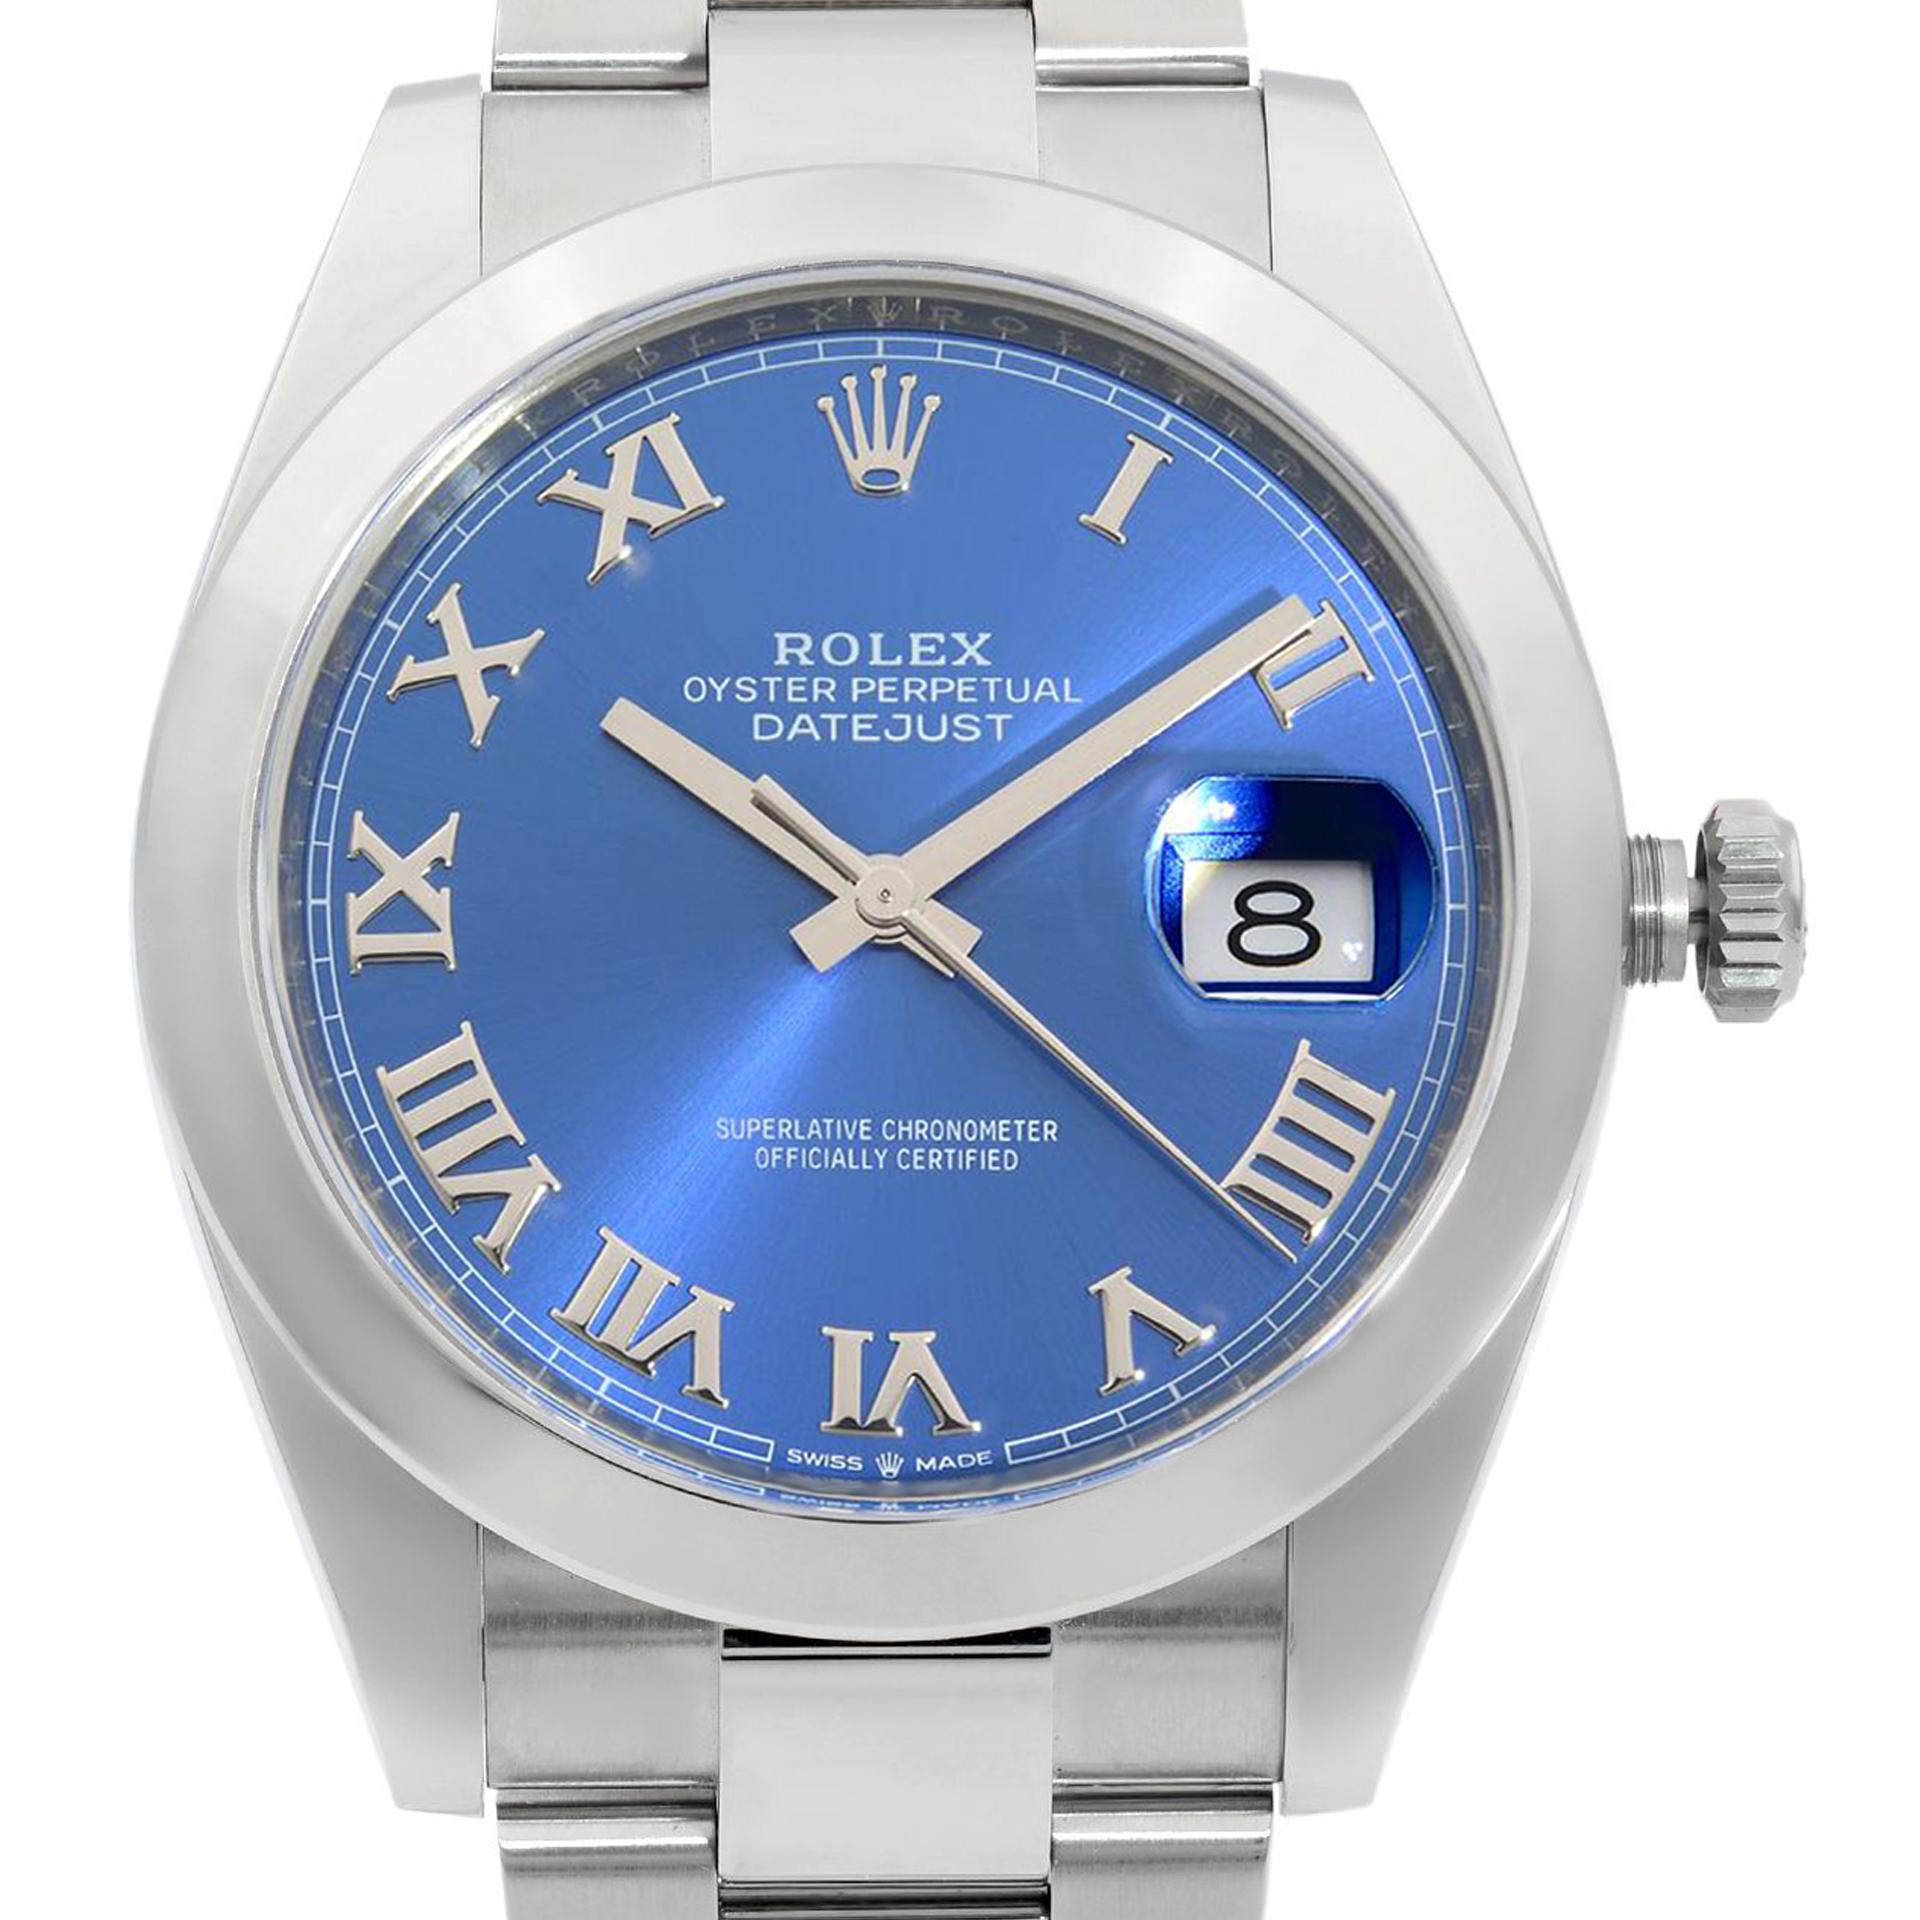 Unworn. 2023 card. Comes with the original box and papers.

* Free Shipping within the USA
* Five-year Rolex warranty coverage
* 14-day return policy with a full refund. Buyers can verify the watch's authenticity at any boutique or dealership within